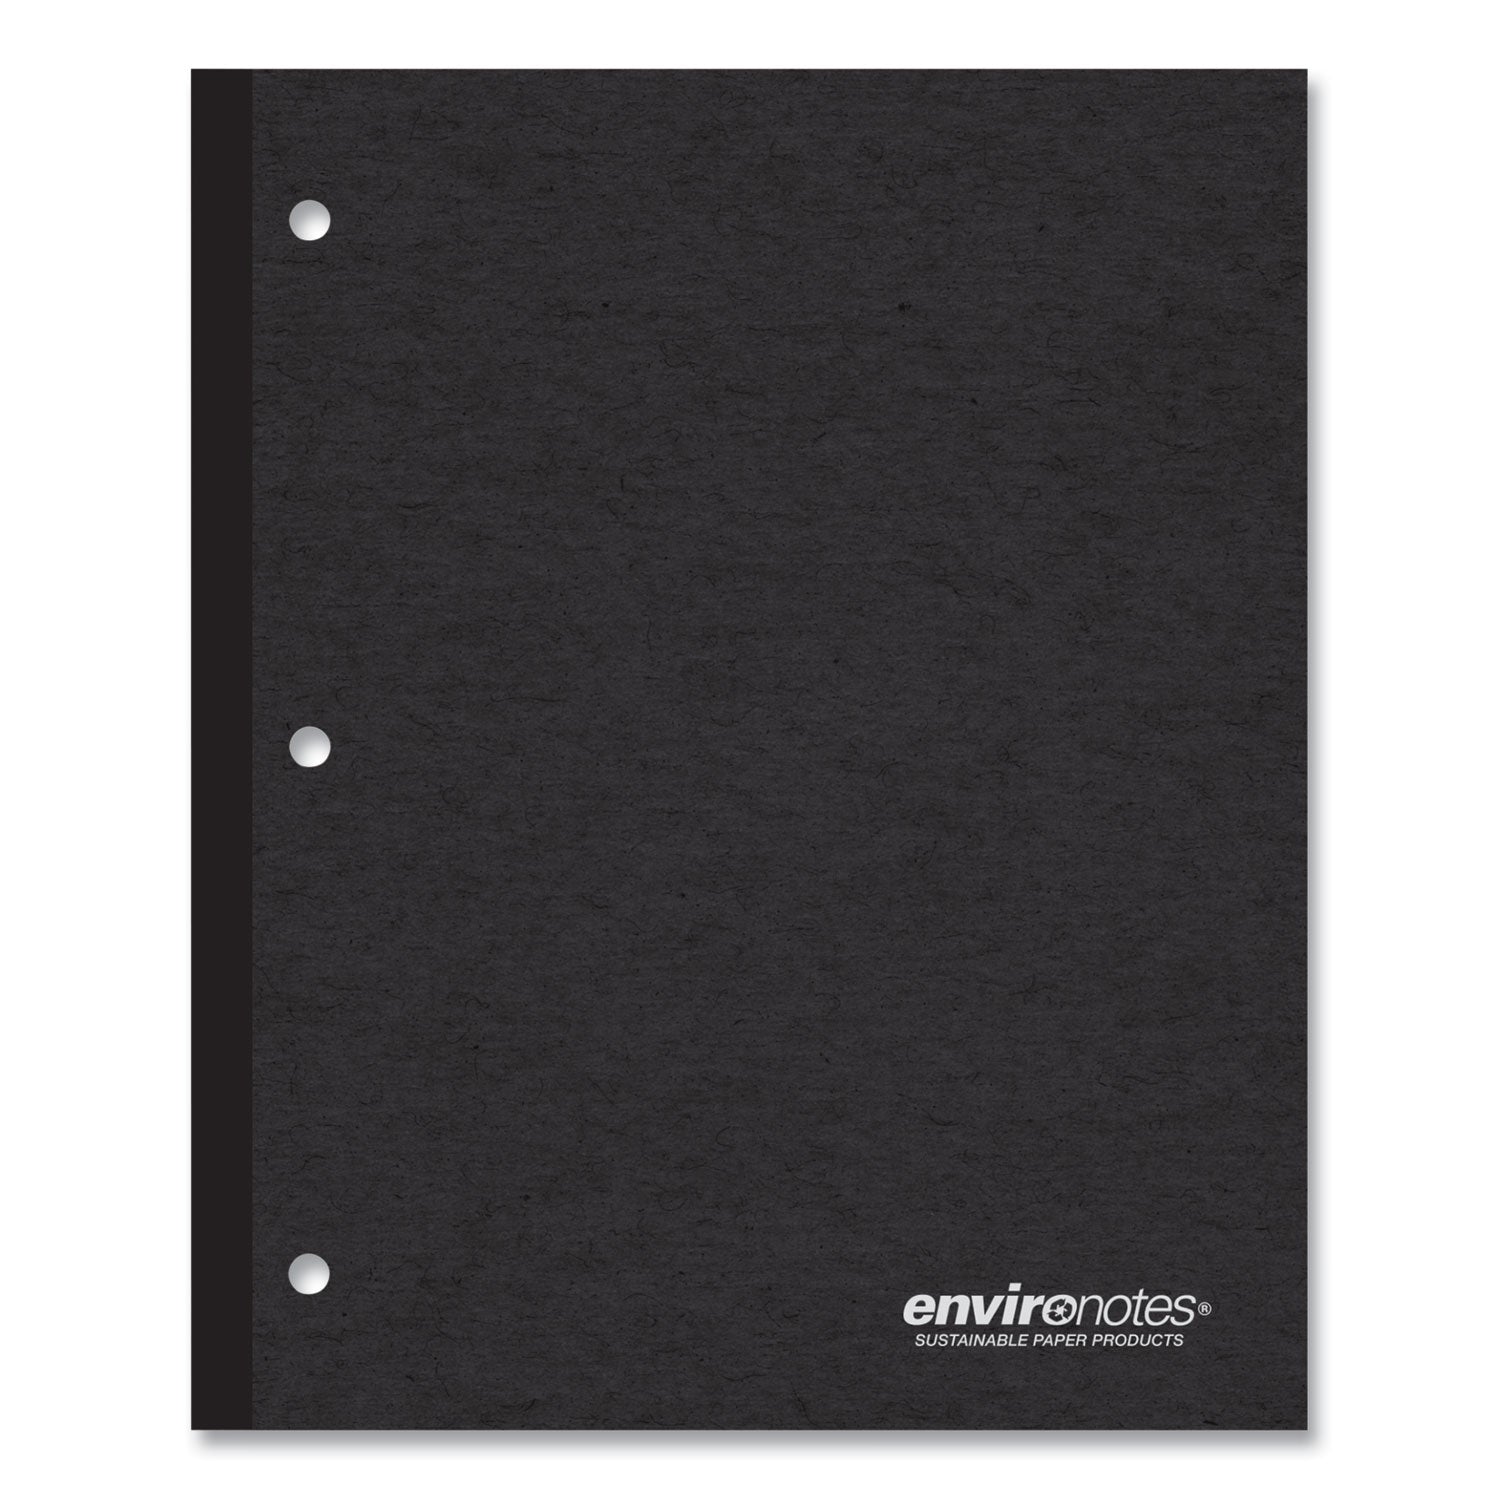 earthtones-wireless-1-subject-notebook-med-college-rule-random-asst-covers-70-11x85-sheets-24-ctships-in-4-6-bus-days_roa20198cs - 6